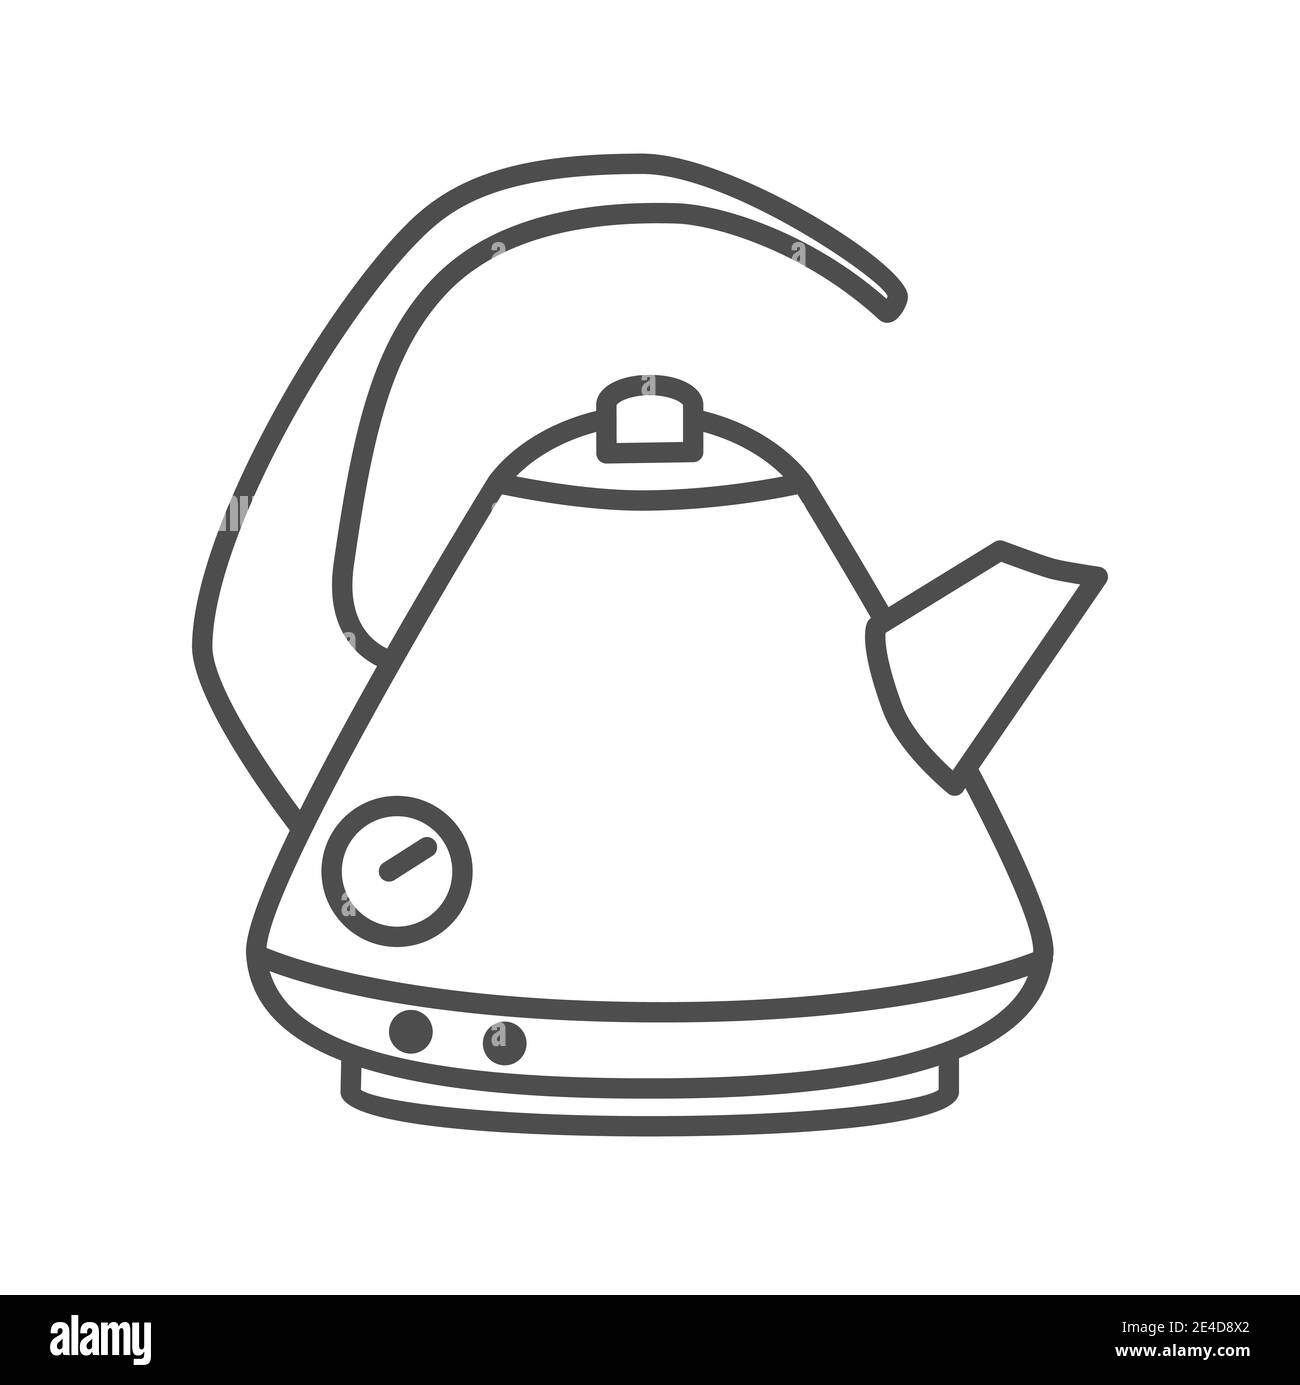 https://c8.alamy.com/comp/2E4D8X2/electric-kettle-thin-line-icon-kitchen-accessory-concept-teakettle-in-classic-style-sign-on-white-background-kettle-for-making-tea-icon-in-outline-2E4D8X2.jpg